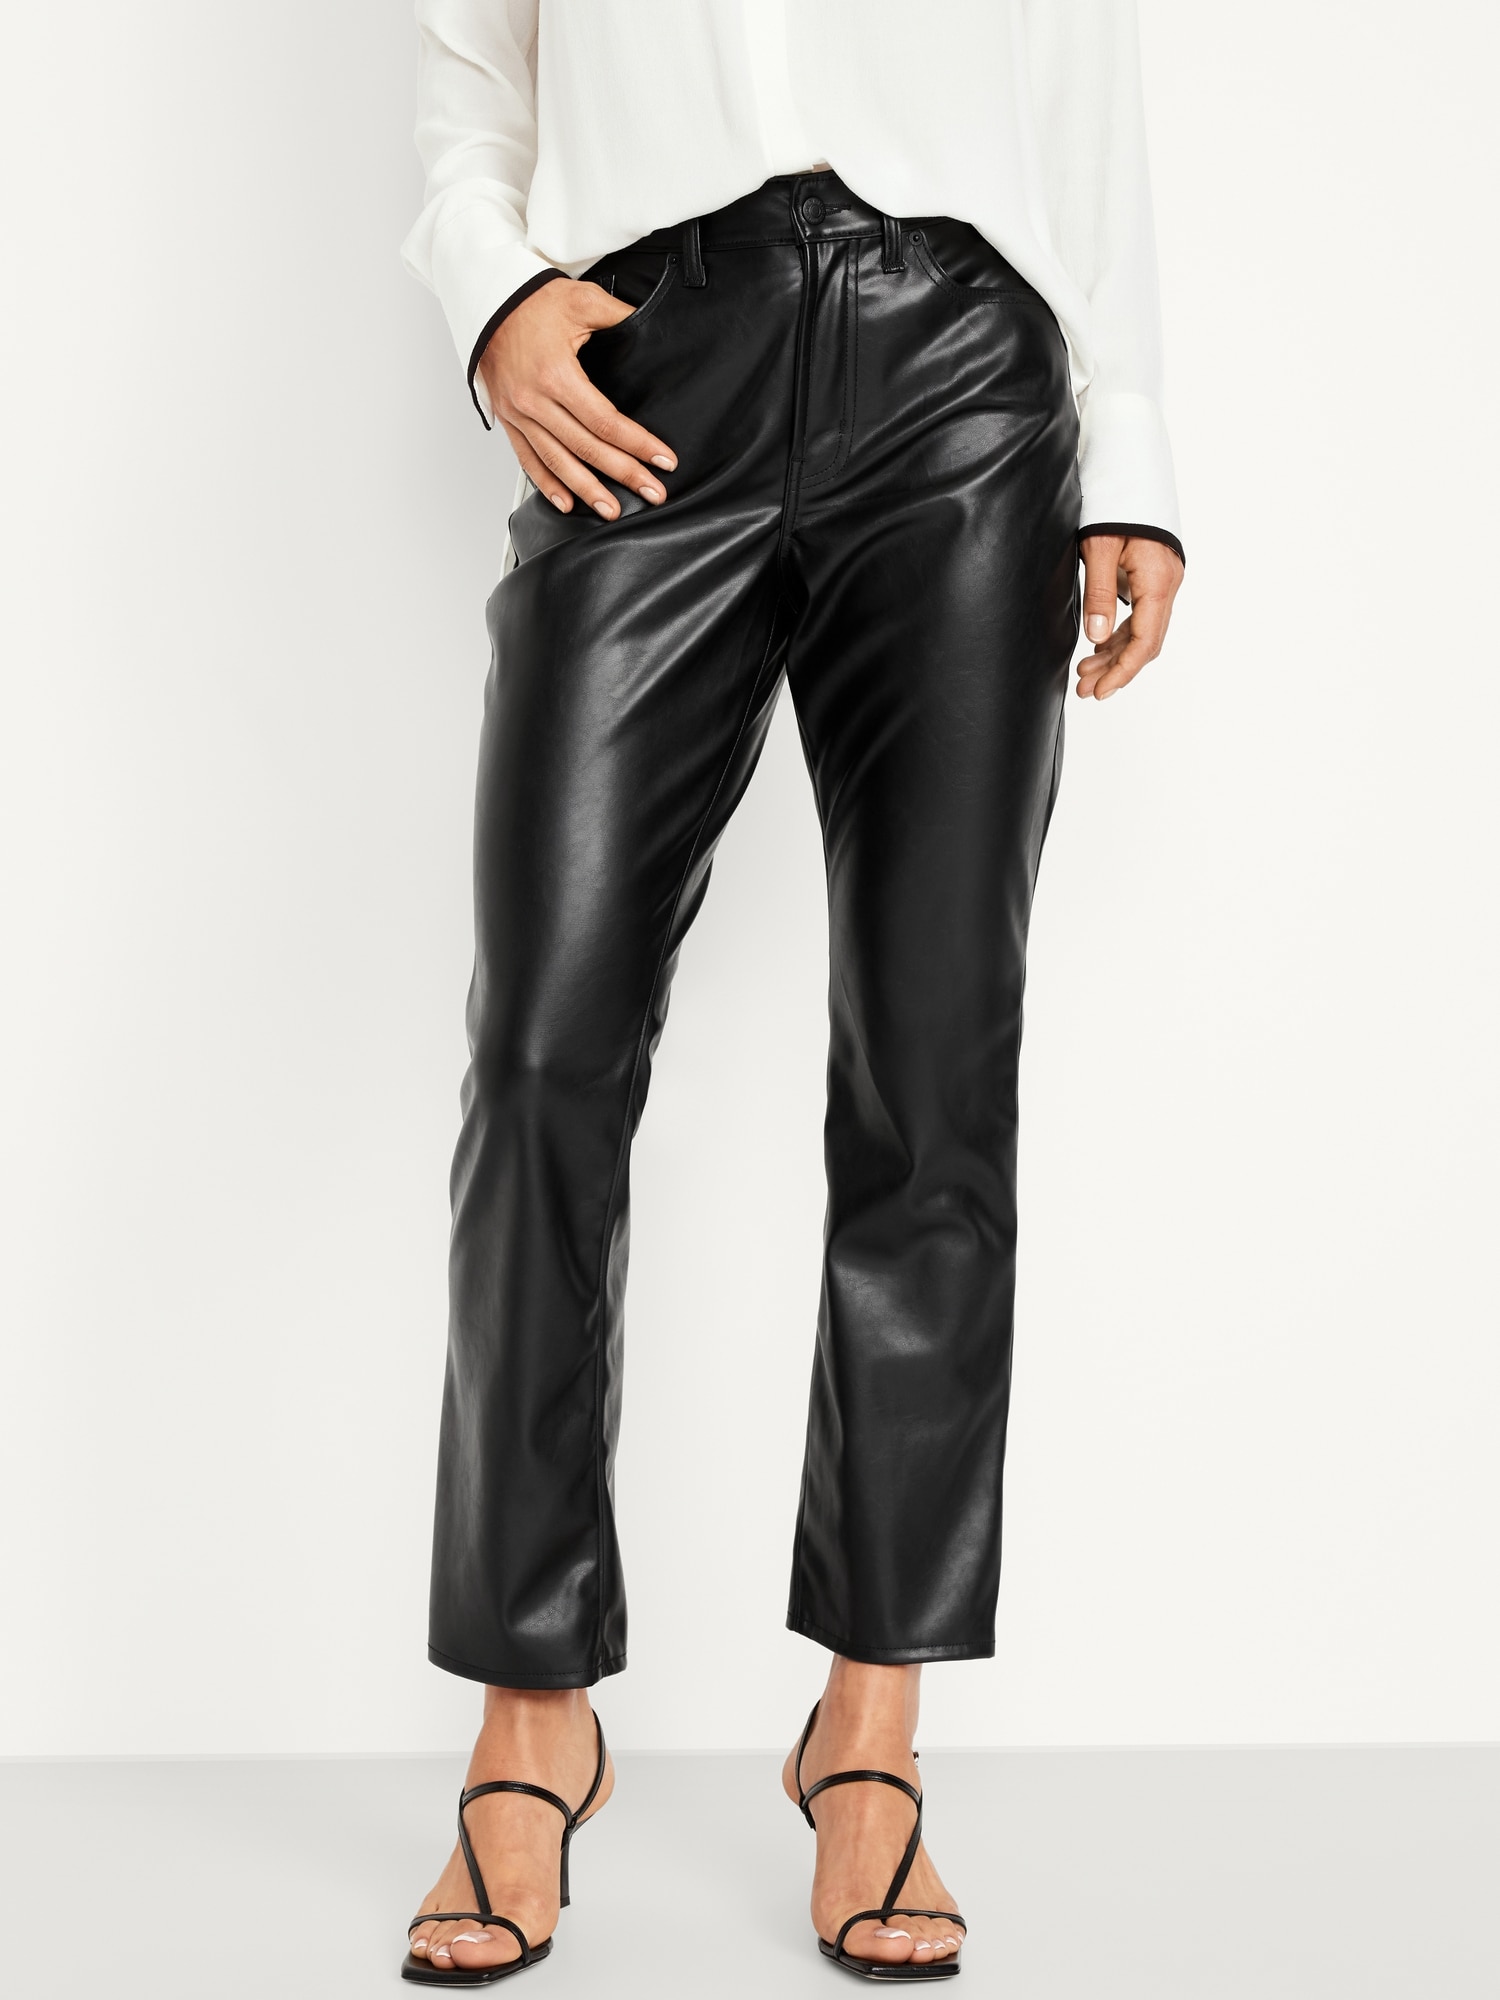 Women Slim Fit Long Bell Bottoms Trousers High Waist Faux Leather Flared  Pants | eBay